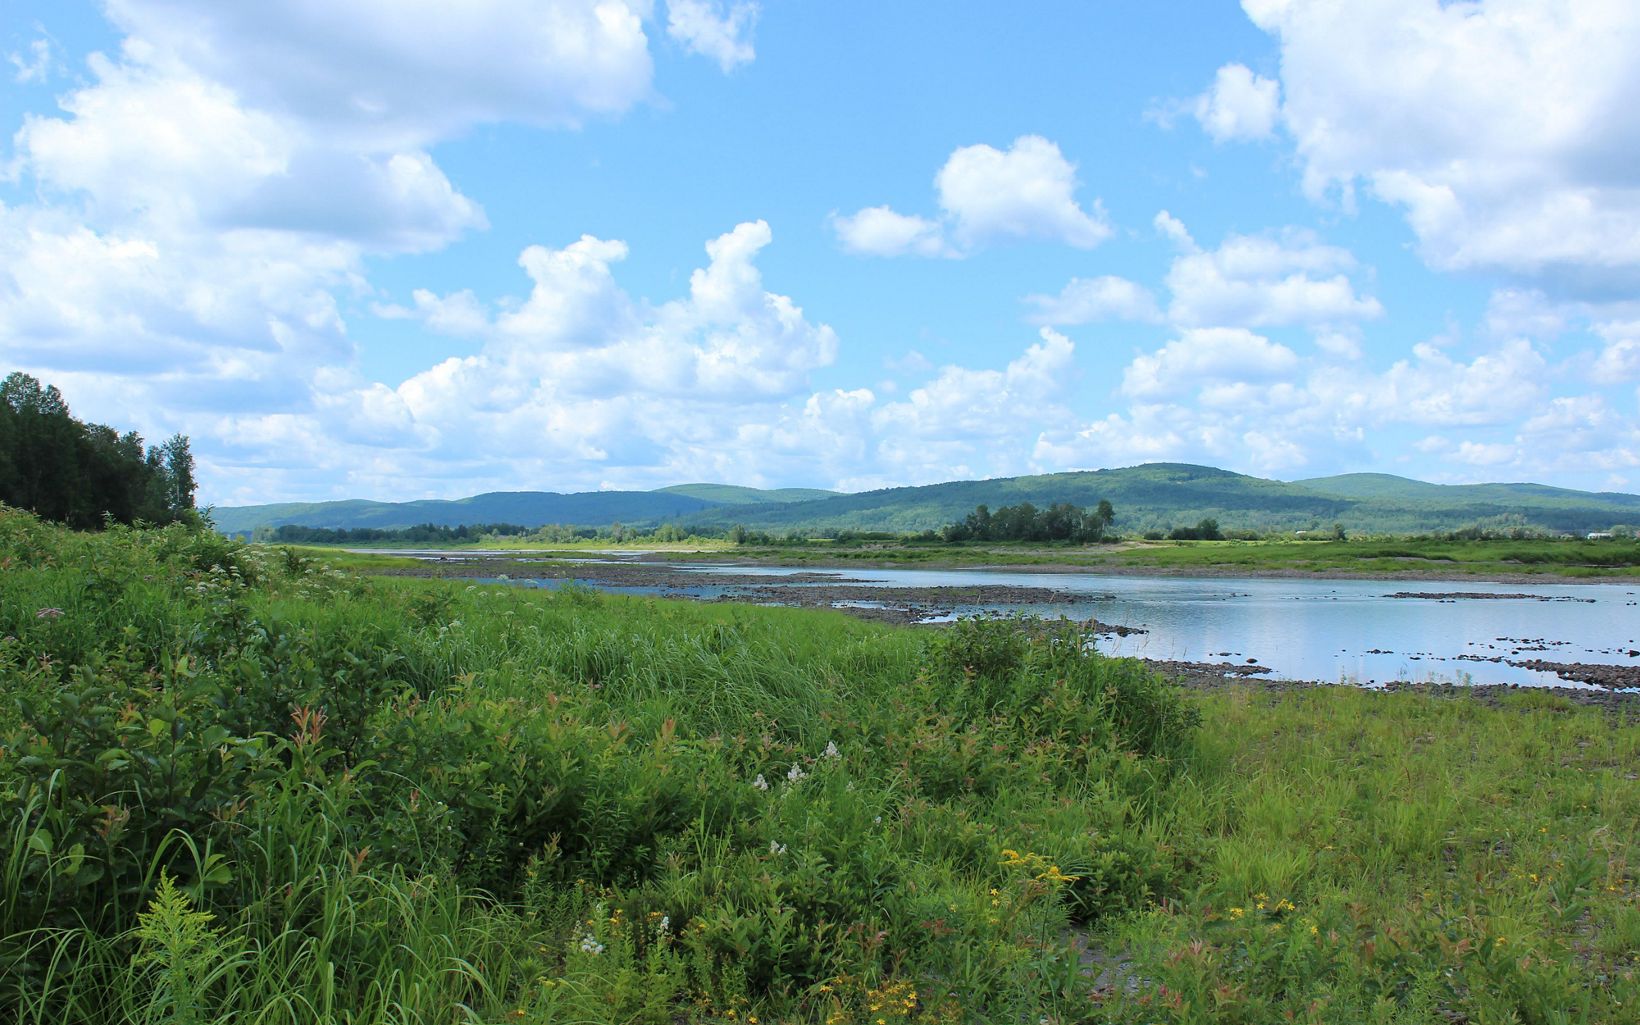 The St. John River with low water levels and green summer growth on the banks.